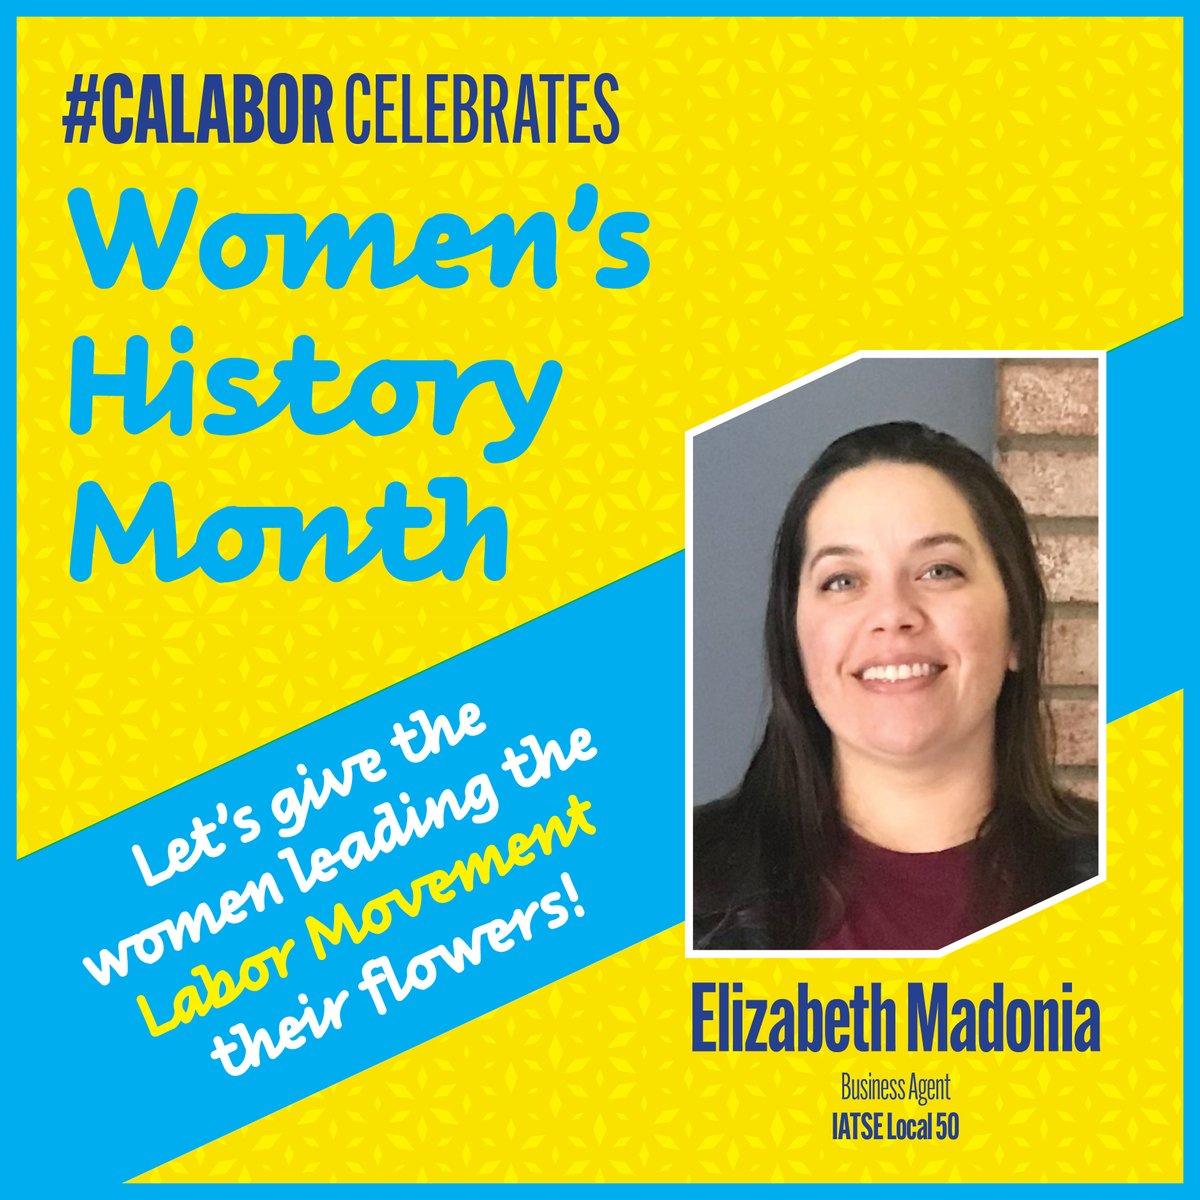 Elizabeth Madonia is Business Agent to IATSE Local 50, a fierce advocate of Labor values & the arts. A student of theater since her teens, her star has always been on the rise! From FOH to BTS, she fights tirelessly for her members everyday! #WomensHistoryMonth #HerStoryInspires